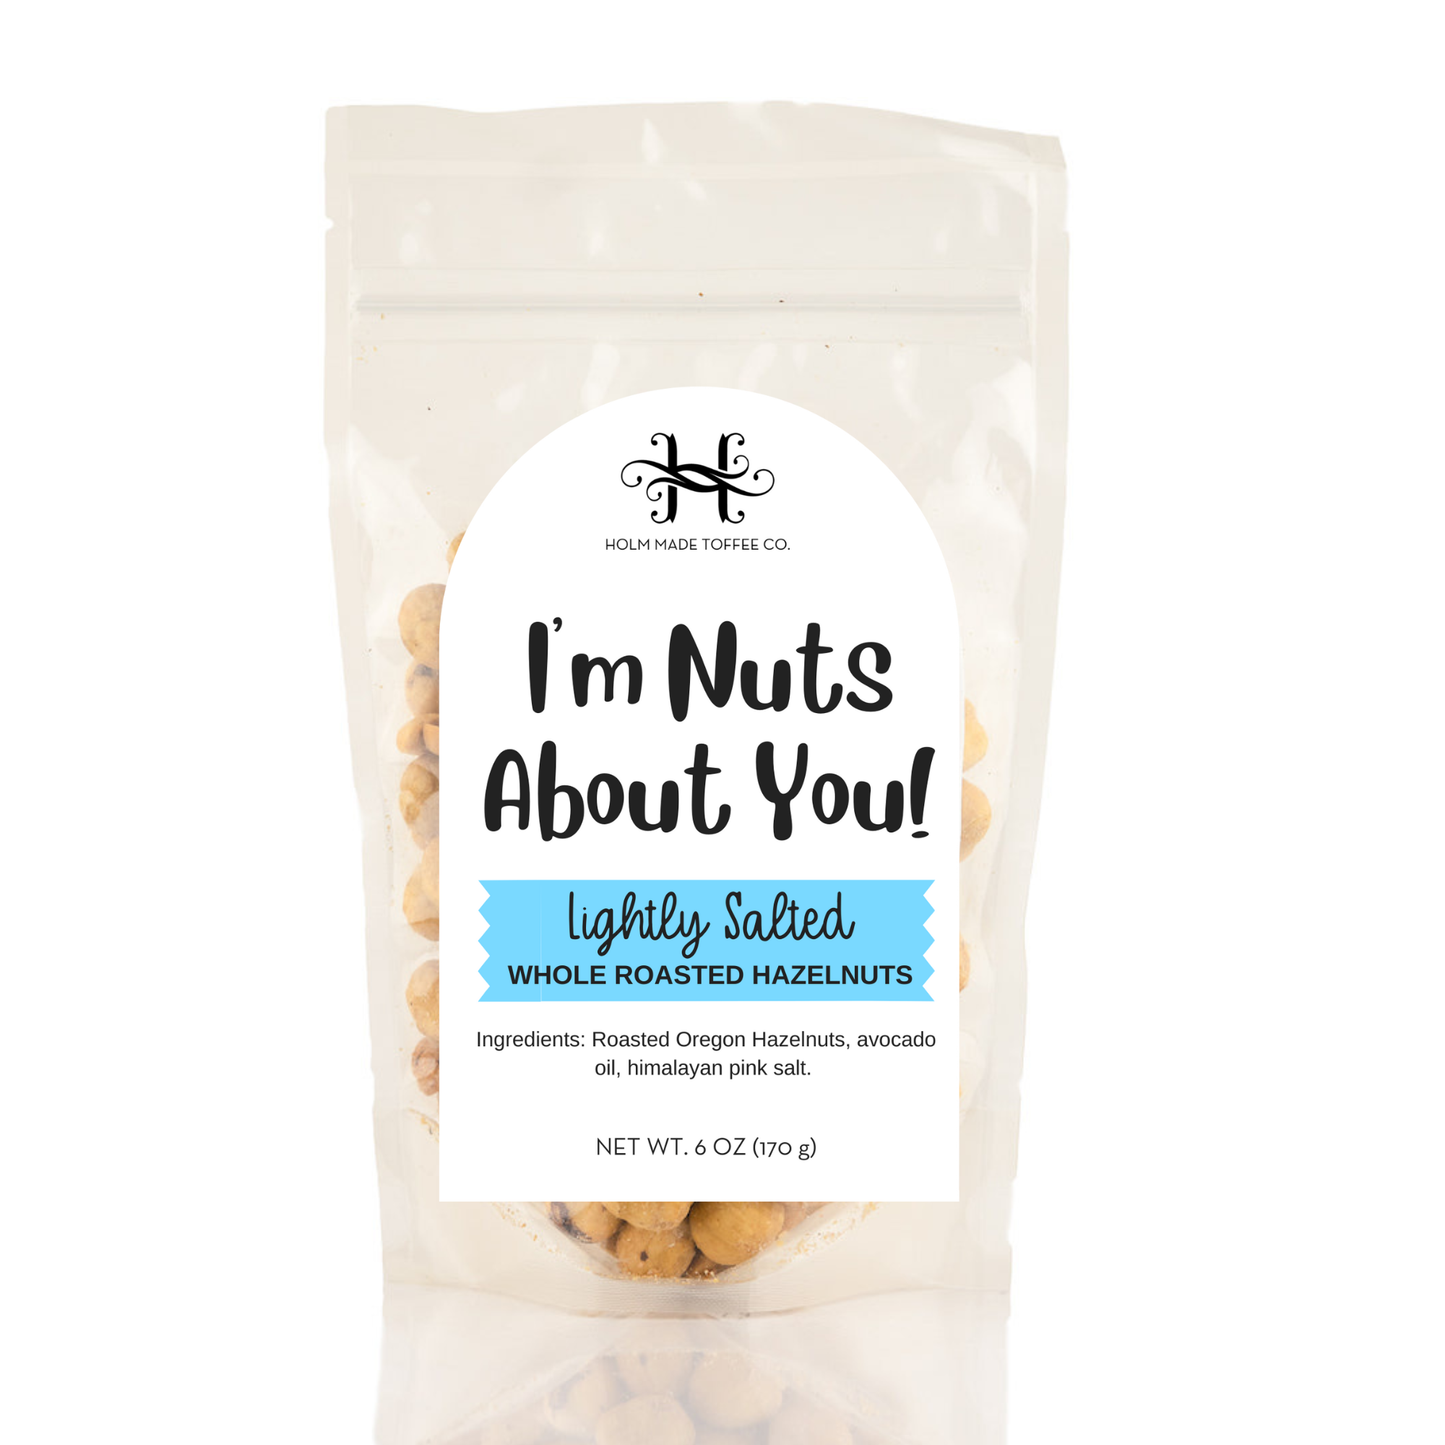 Holm Made Toffee Co. I'm Nuts About YOU! Hazelnuts